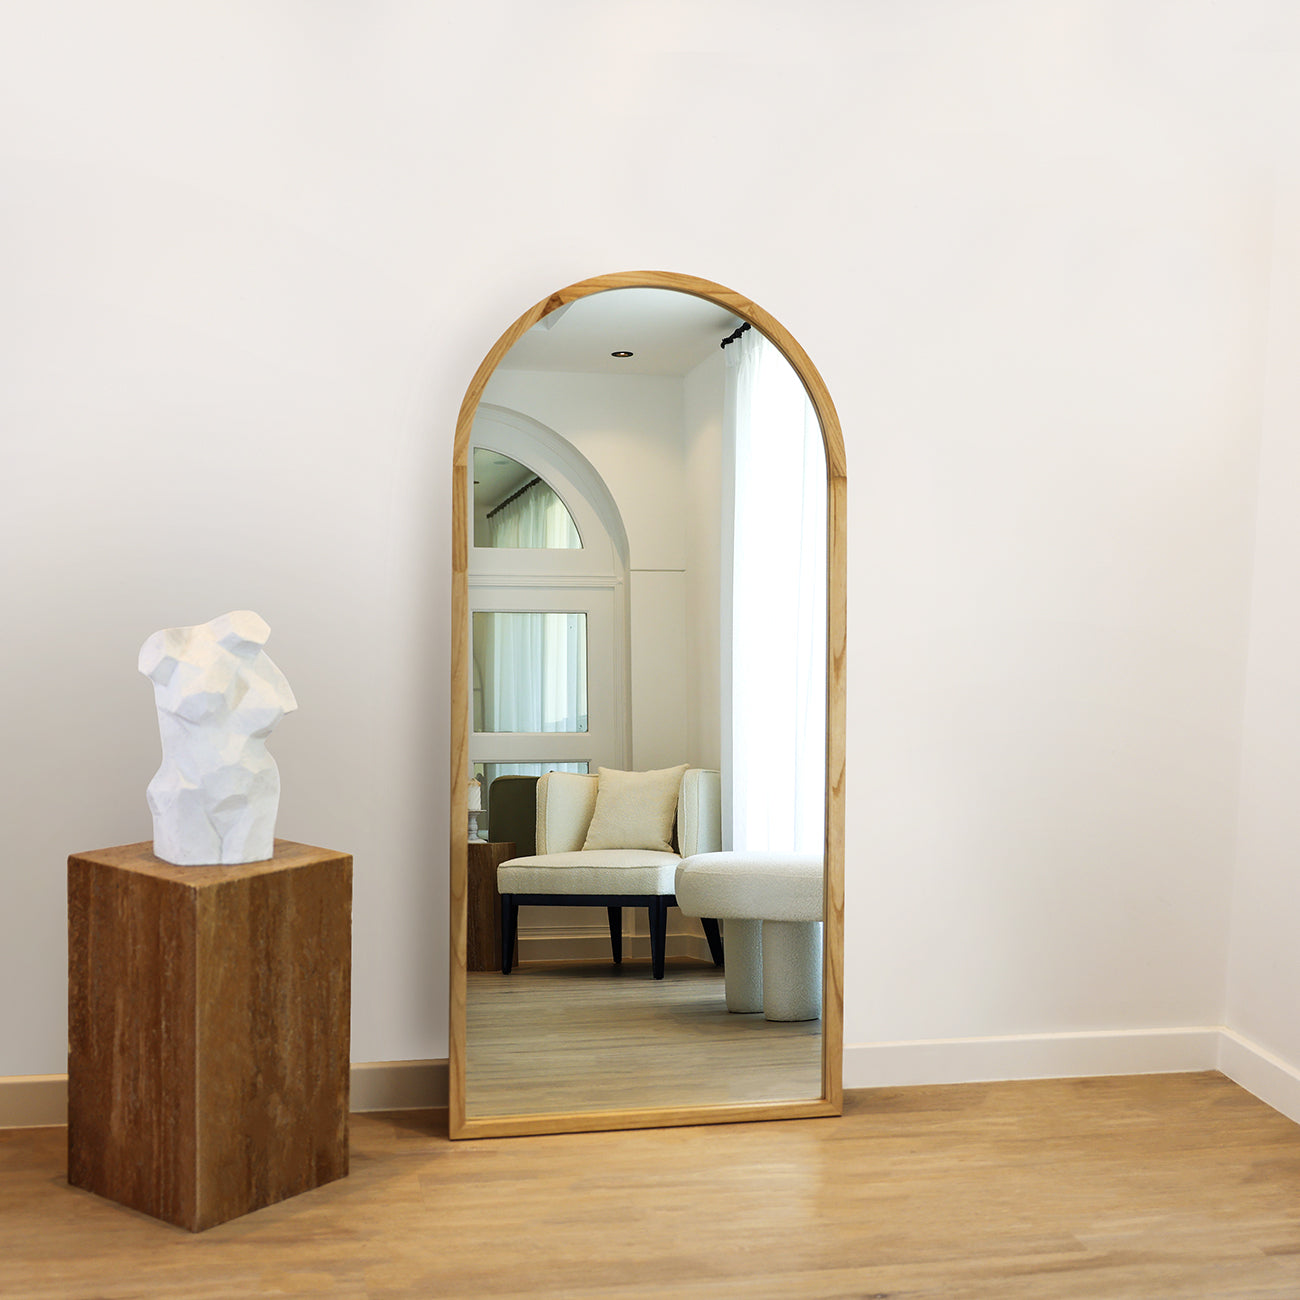 NOOR - HAND MADE SYCAMORE WOOD FULL LENGTH ARCHED MIRROR 170CM X 80CM